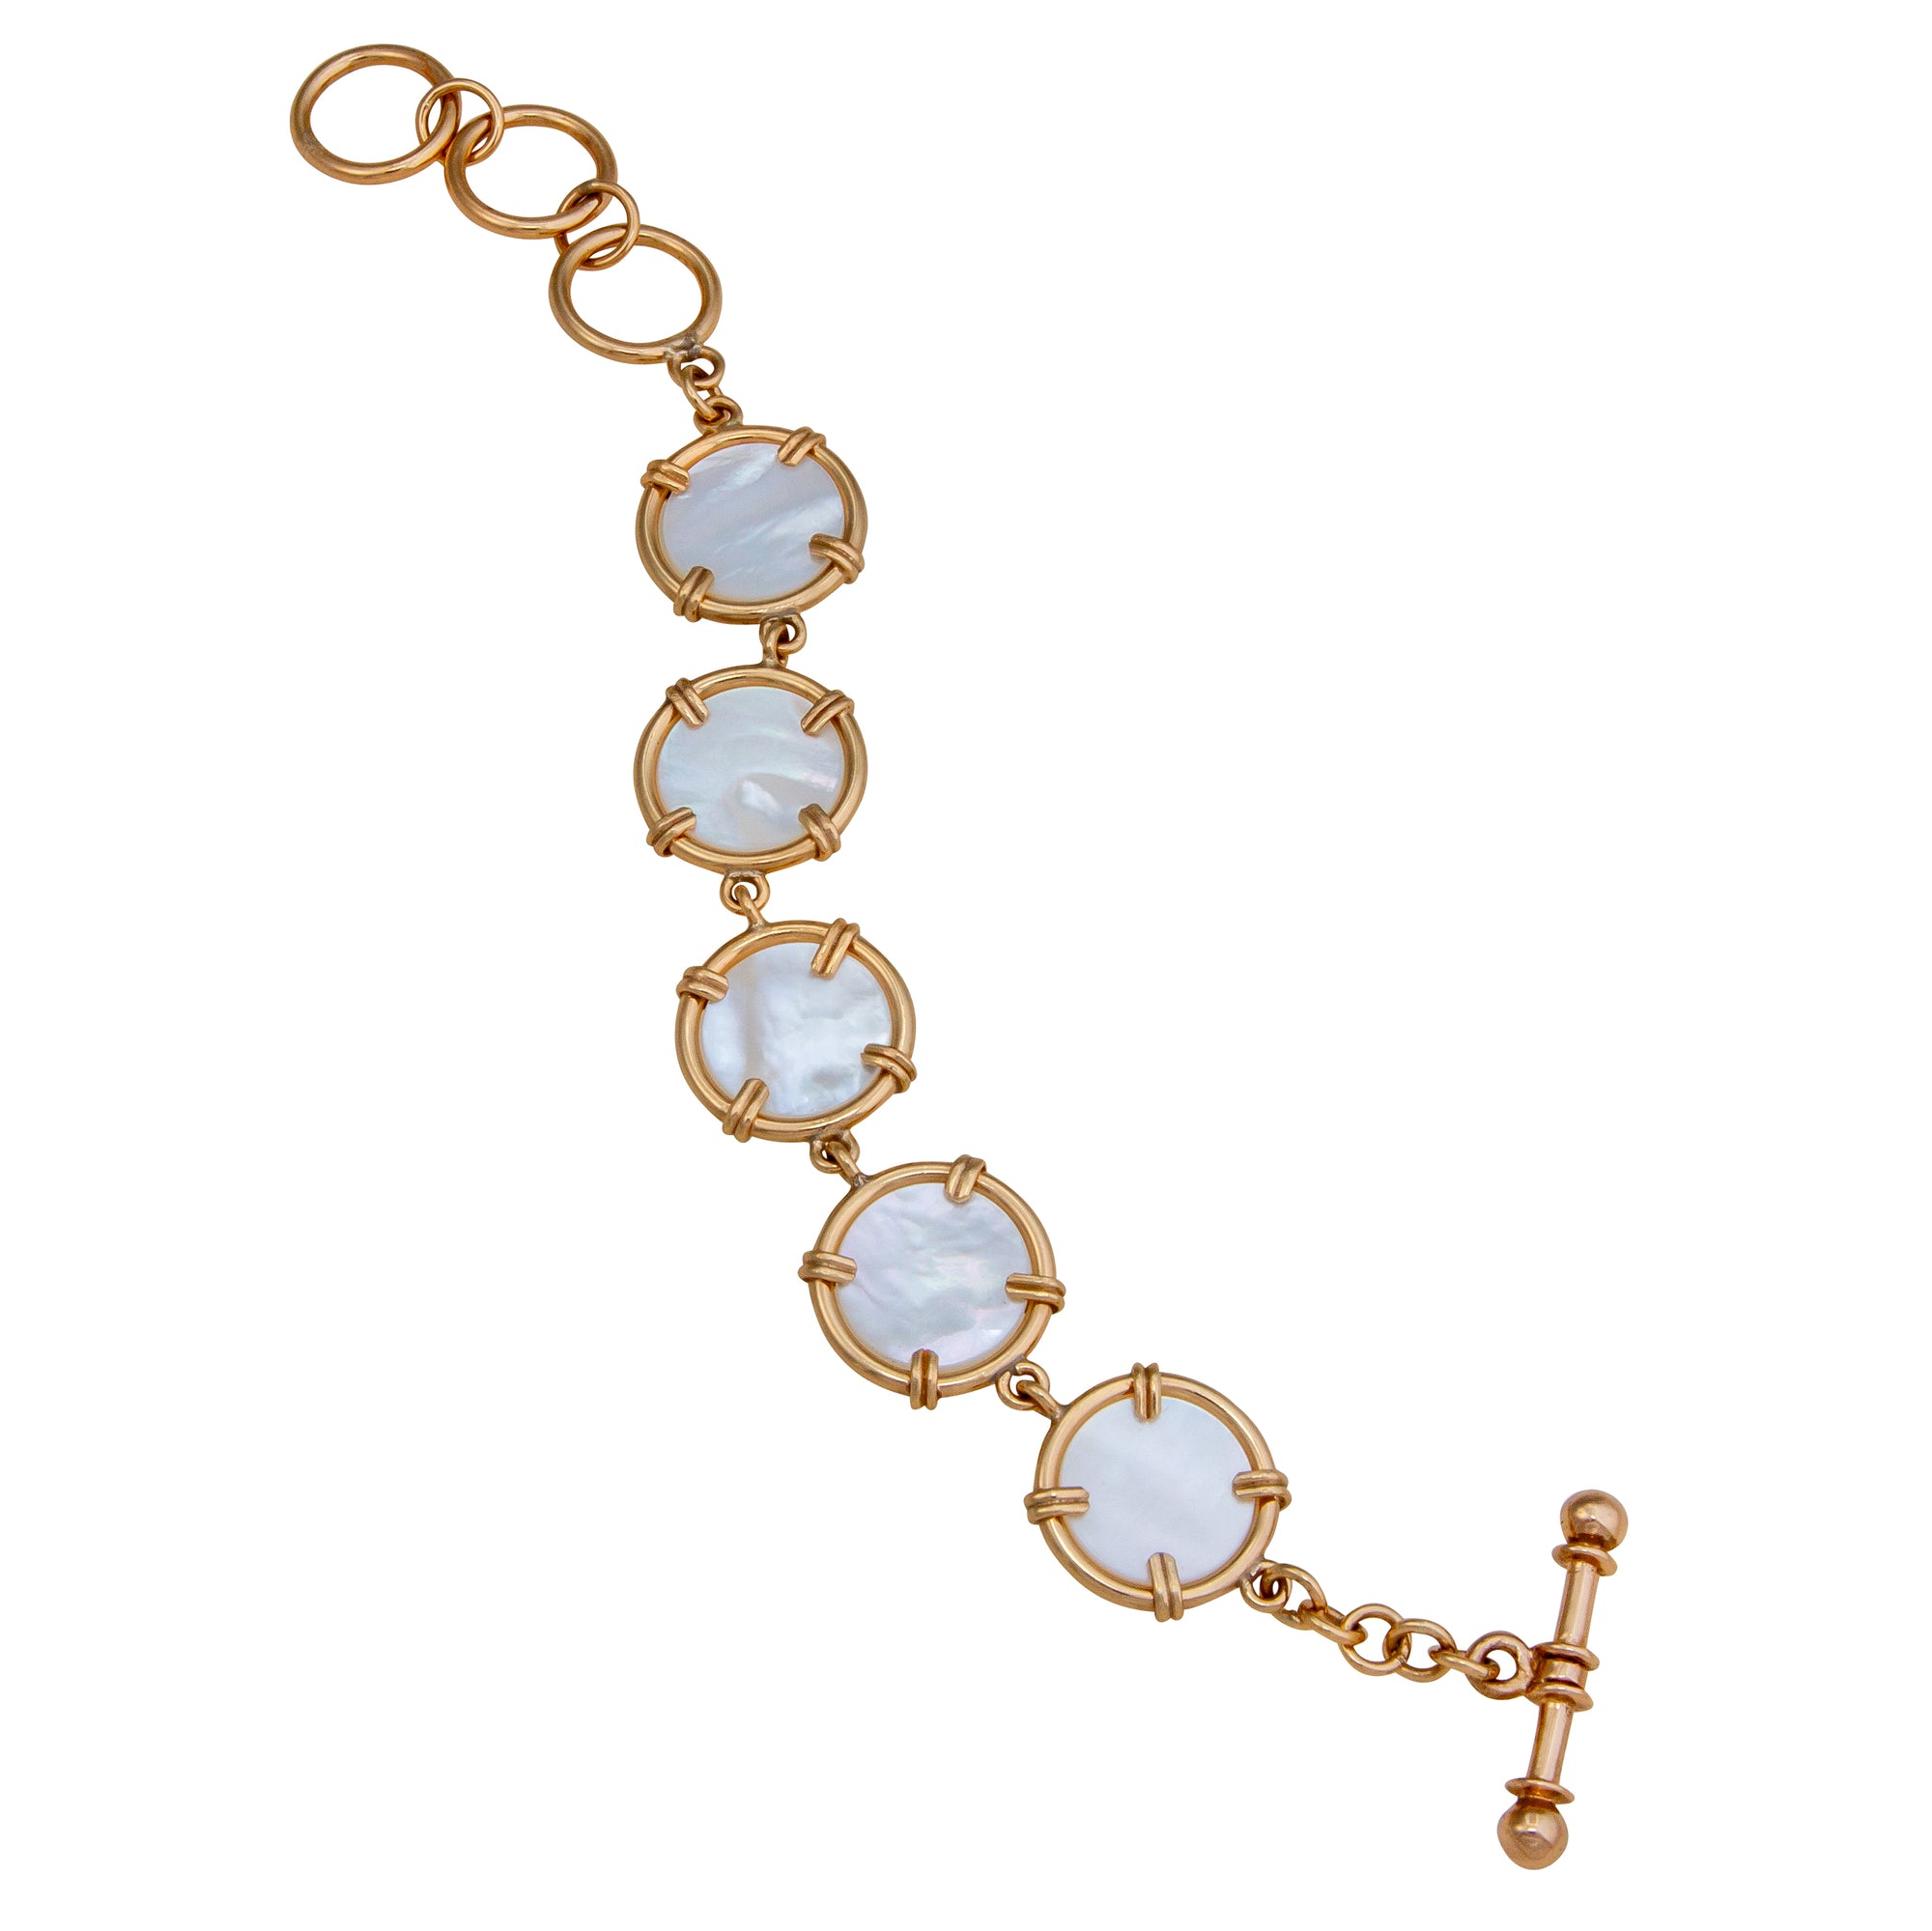 Alchemia Mother of Pearl Prong Set Bracelet | Charles Albert Jewelry